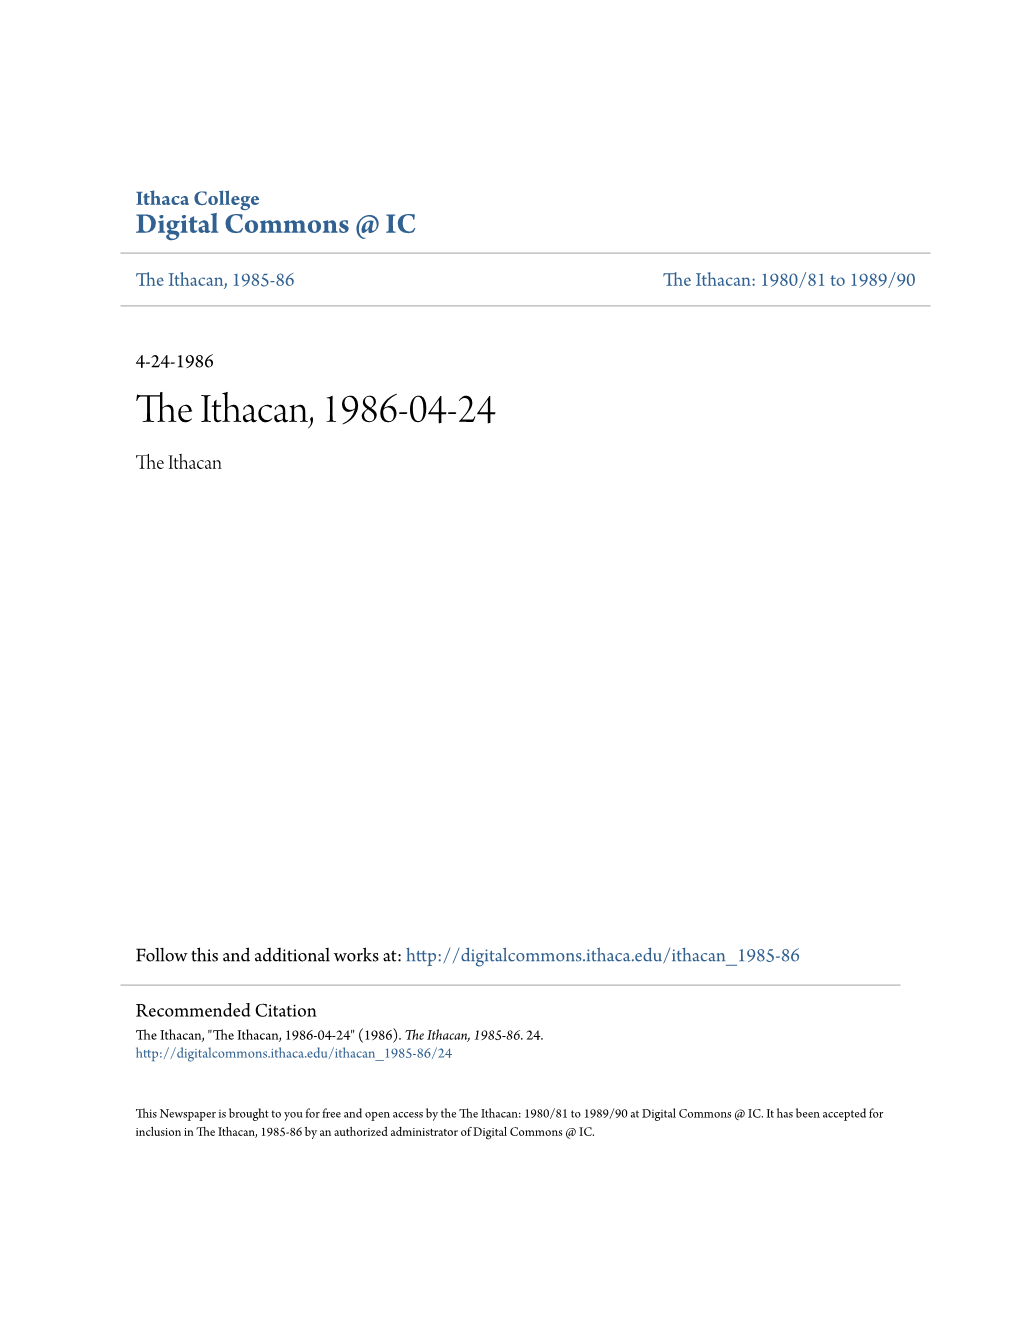 The Ithacan, 1986-04-24